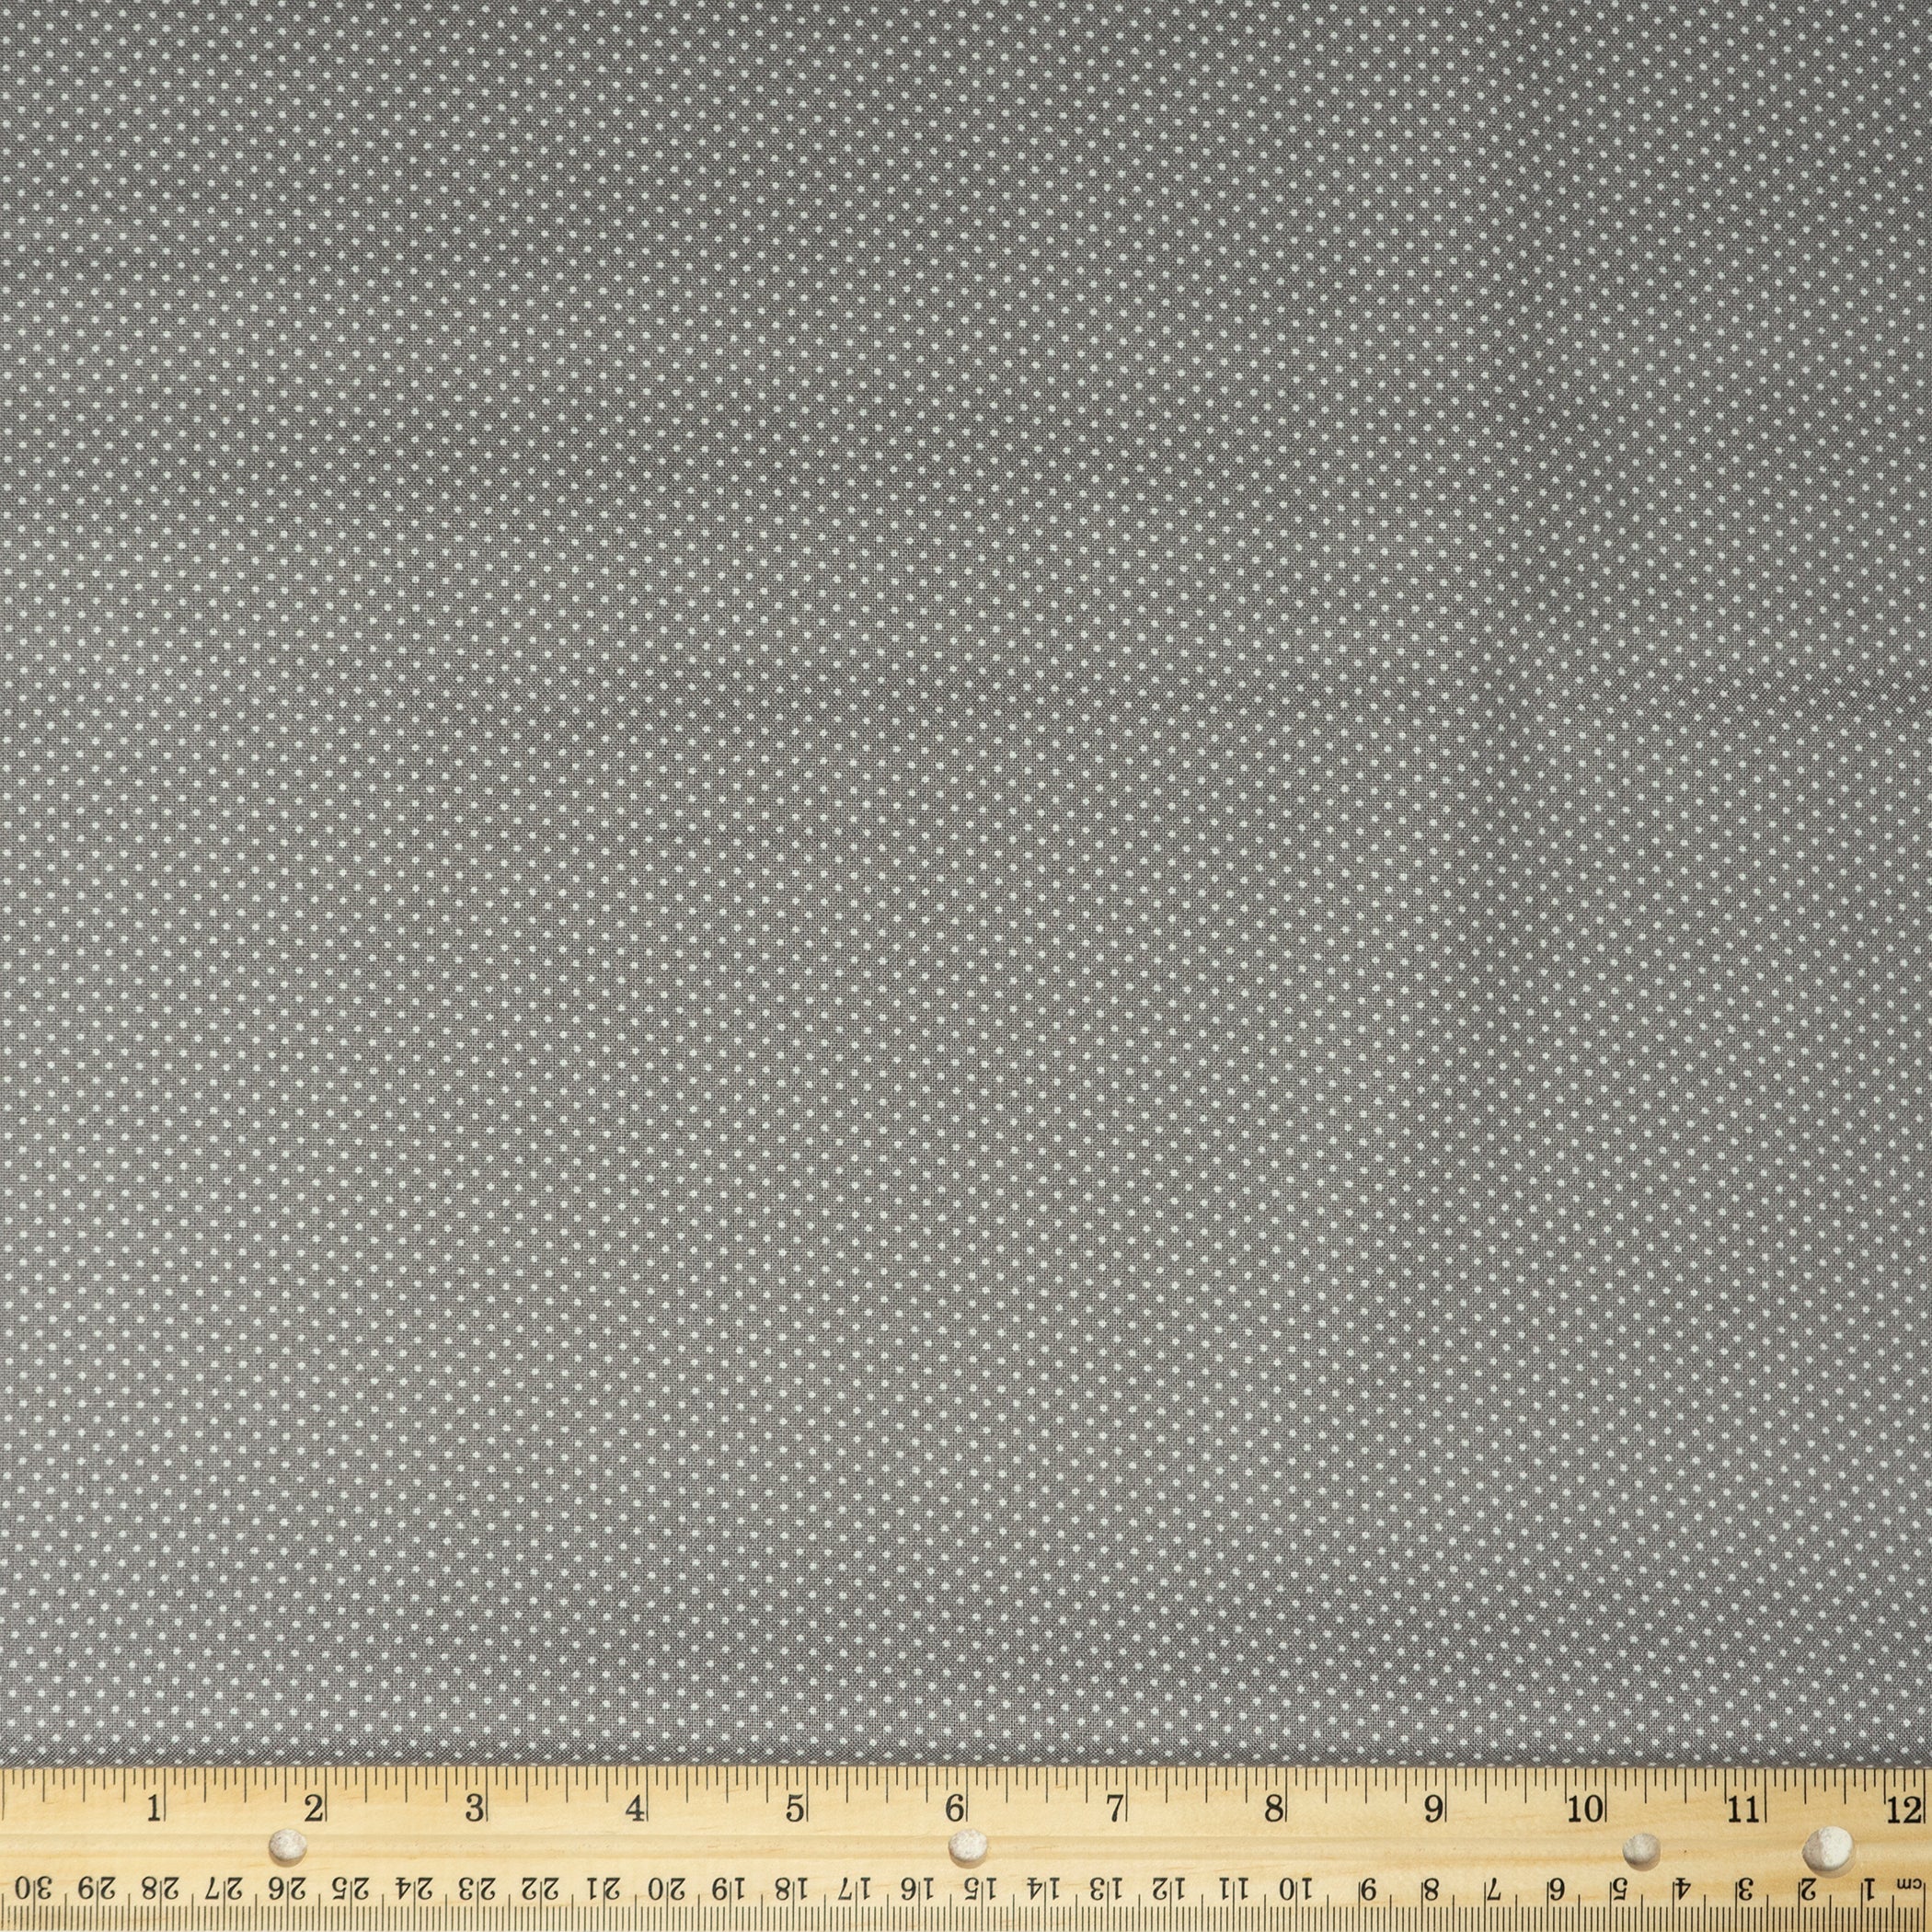 Waverly Inspirations Cotton 44" Pindot Steel Color Sewing Fabric by the Yard